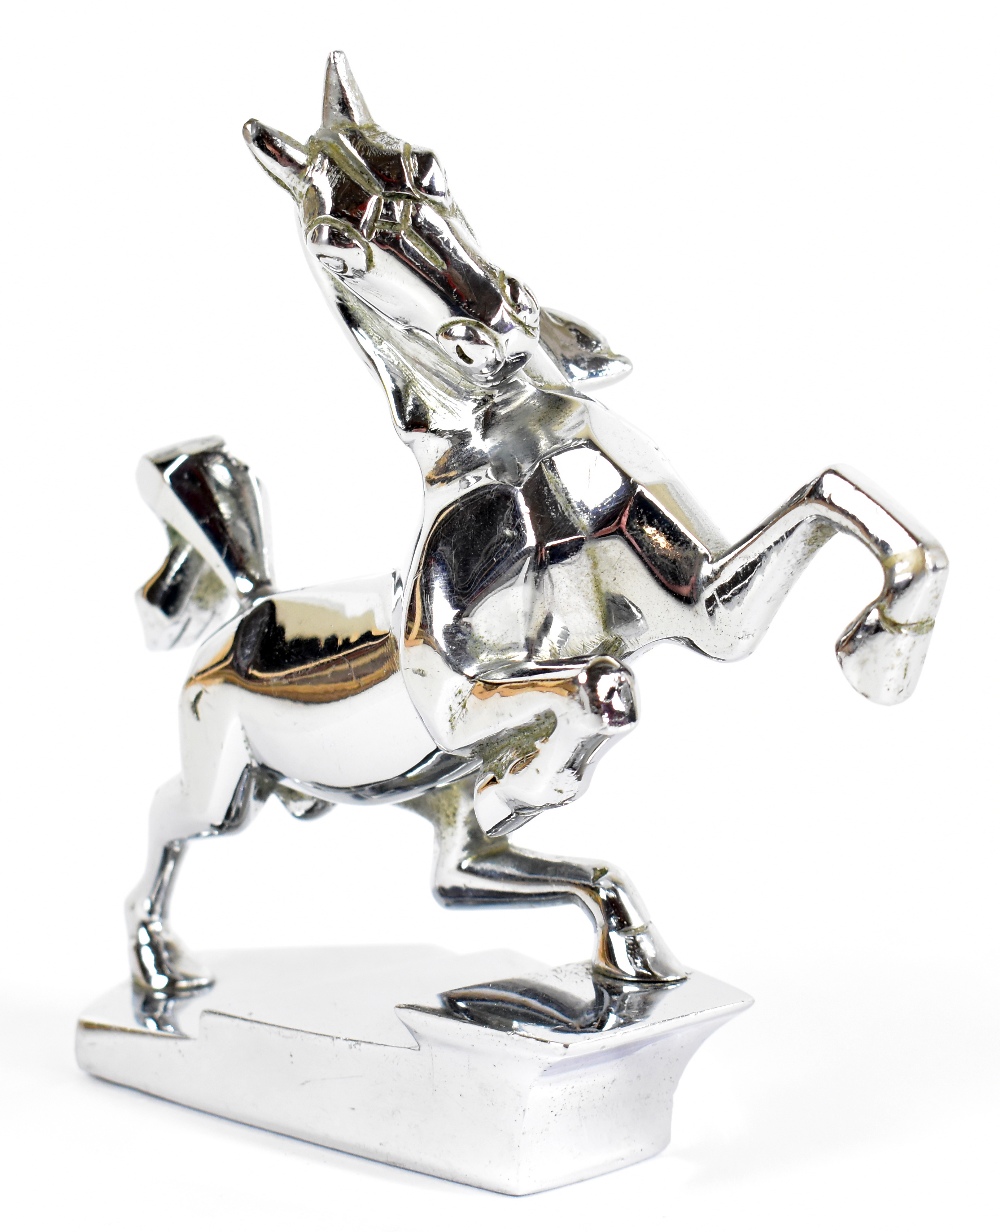 PULLMAN HUMBER; an Art Deco nickel plated car mascot modelled as a horse, on stepped base, the